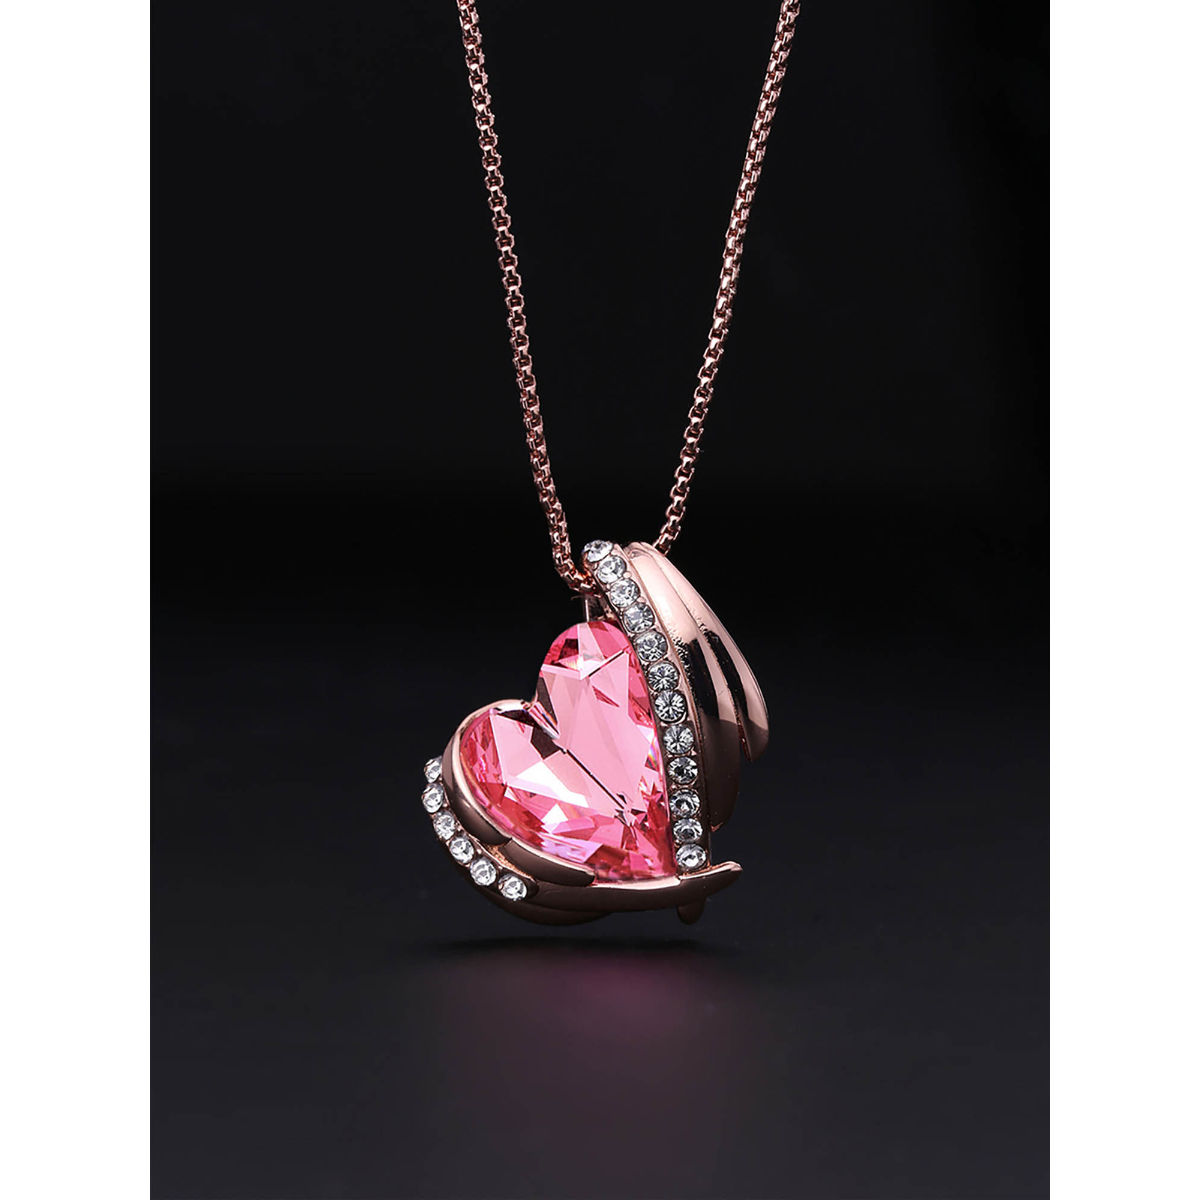 Reign Swarovski Crystal Heart Pendant Necklace, with Inspirational Gre -  Quan Jewelry